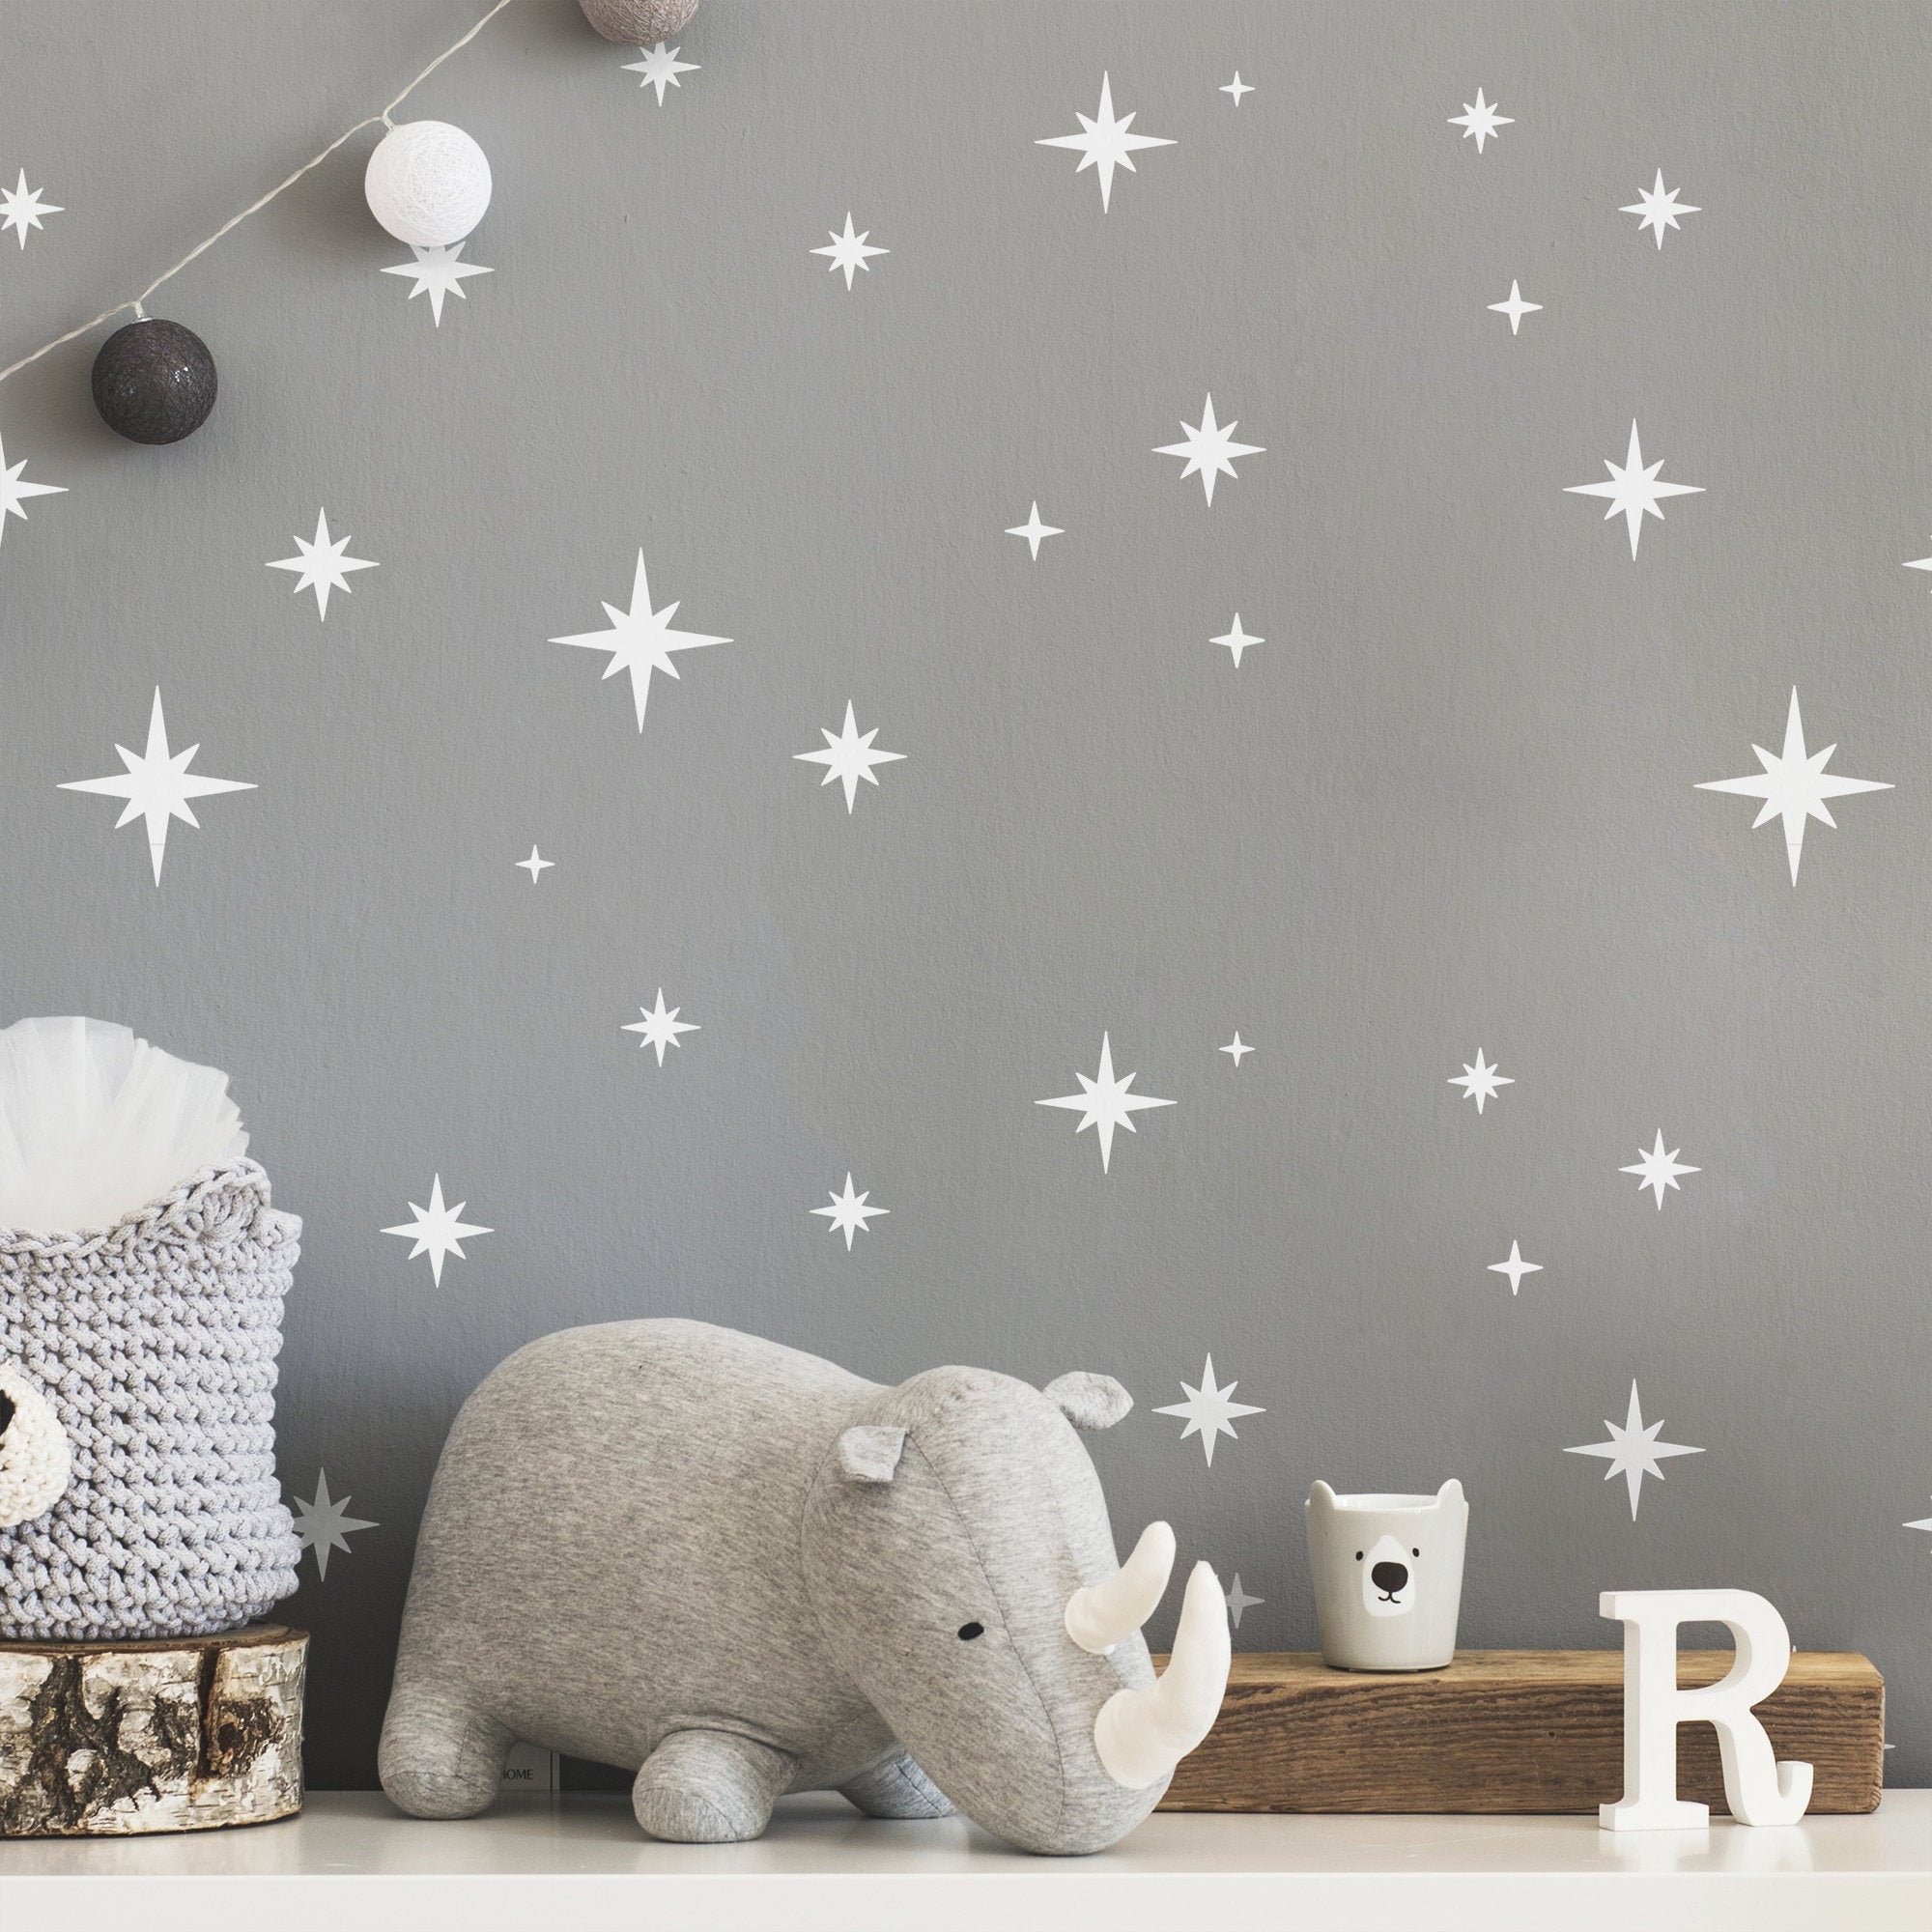 Star Stencils Reusable Stencils for Wall Art, Home Décor, Painting